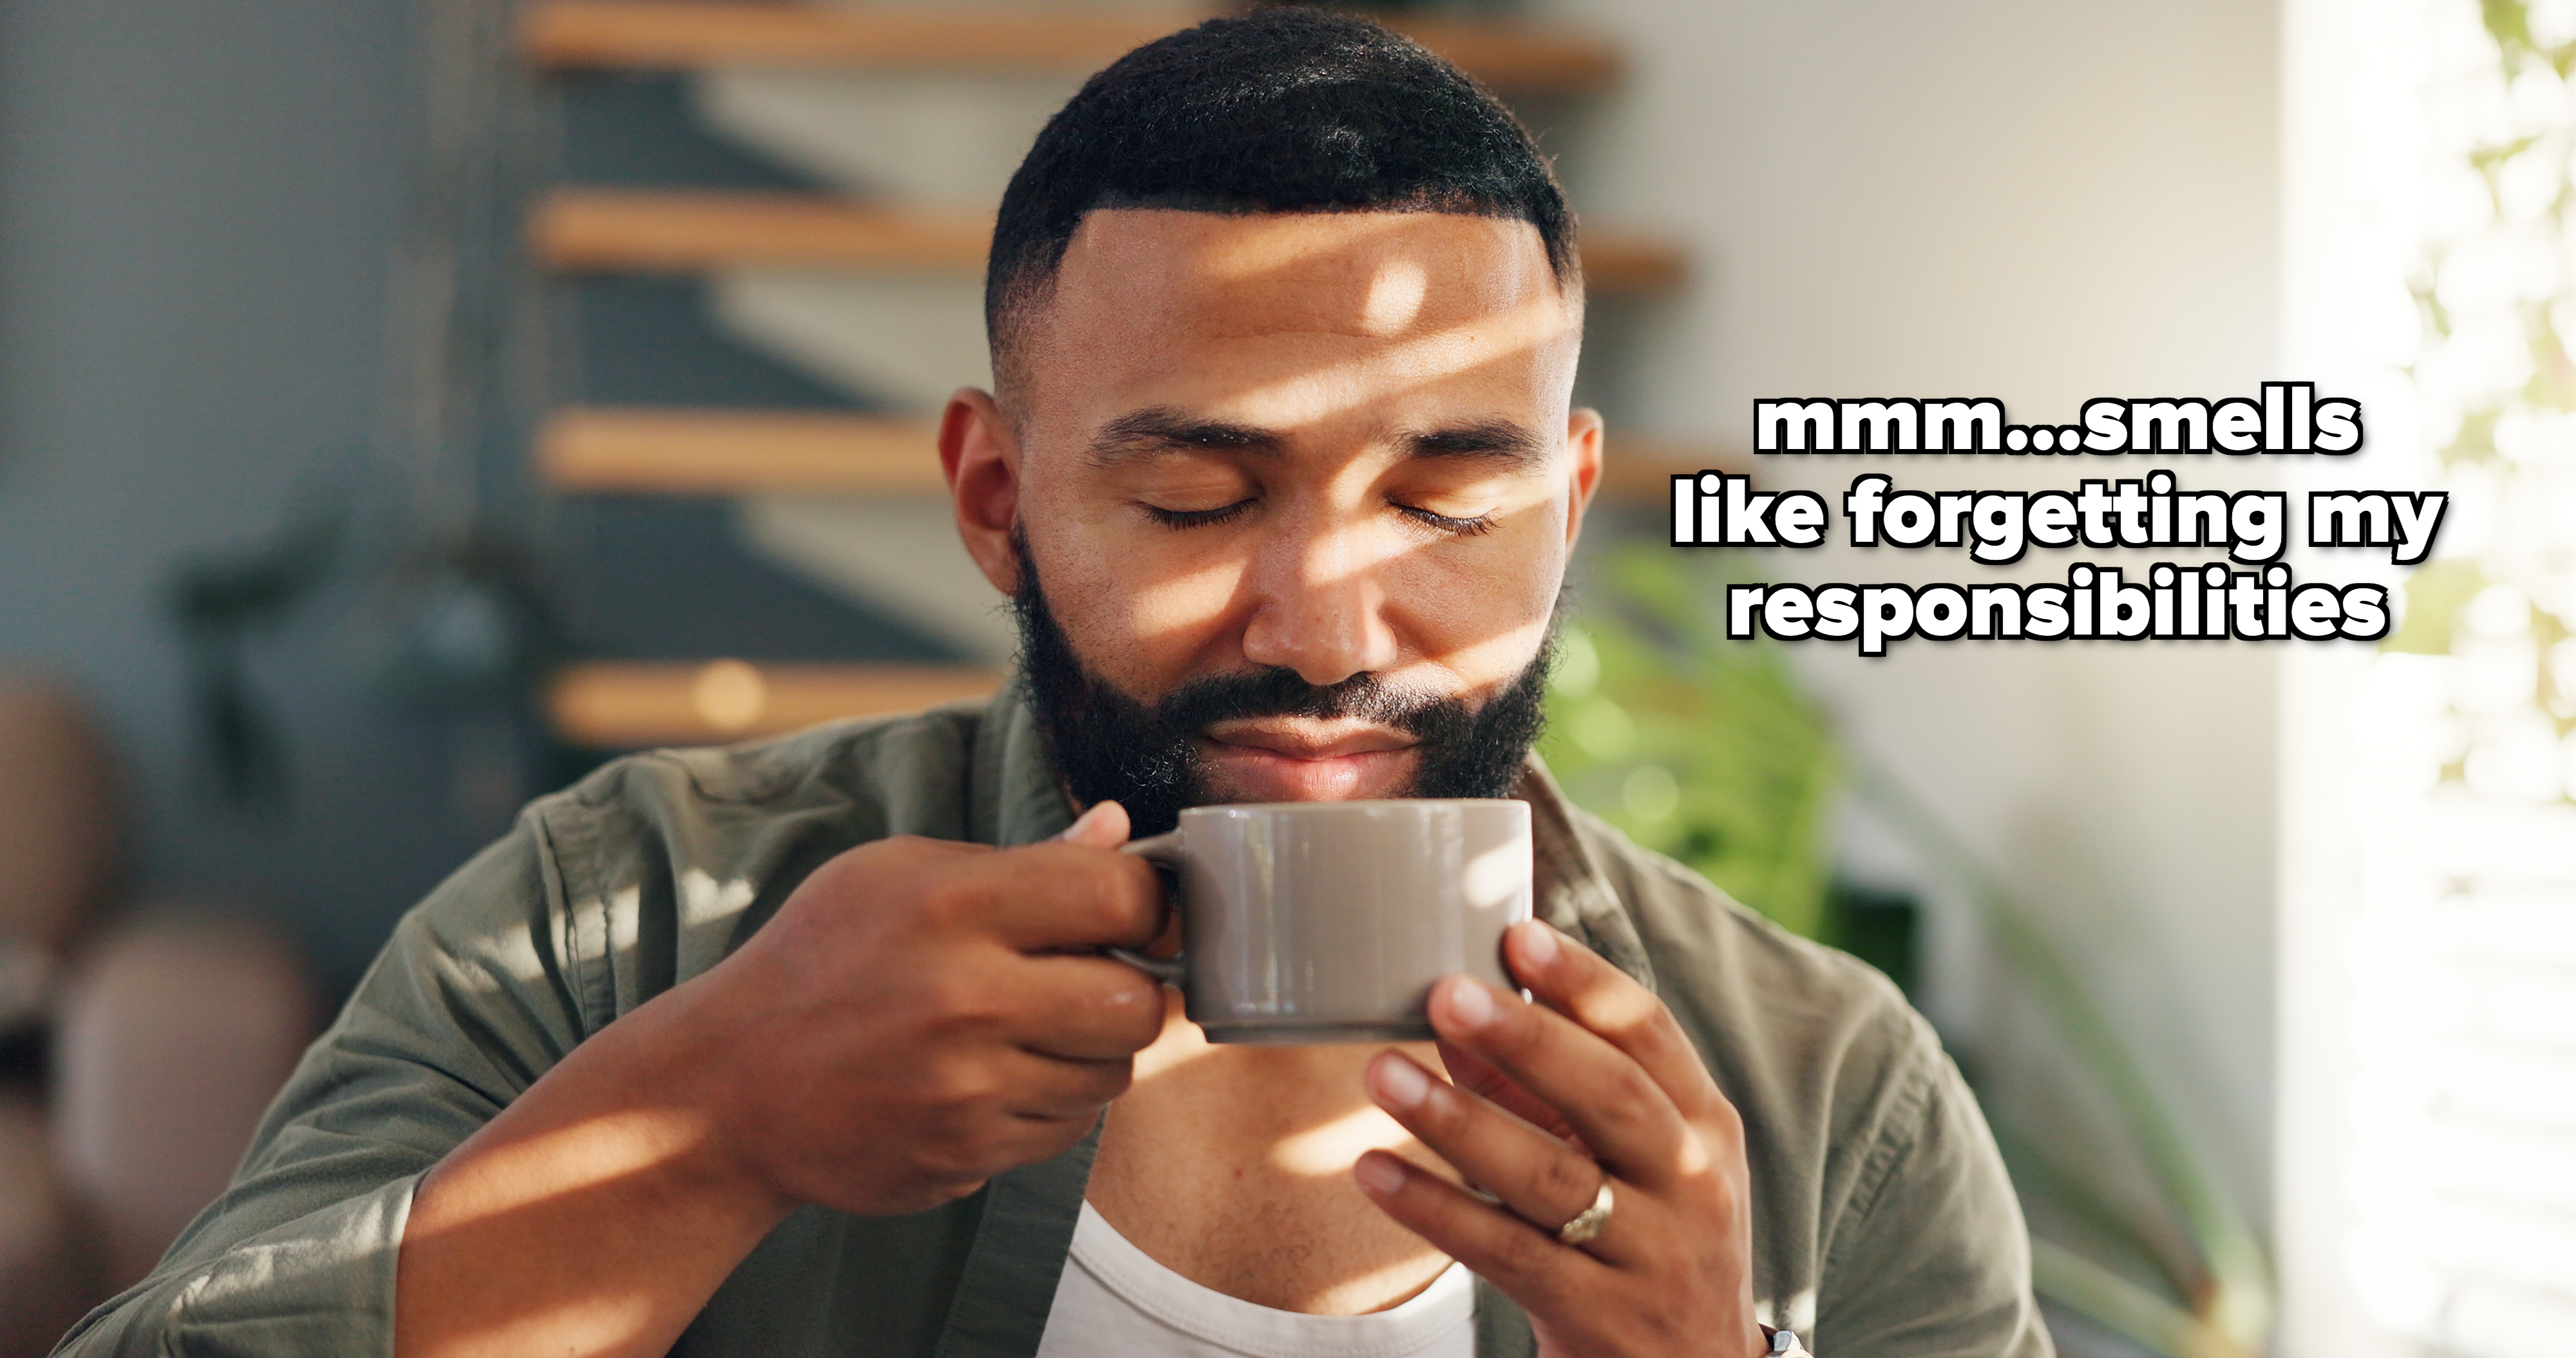 Man with a beard enjoying a cup of coffee with his eyes closed, indoors